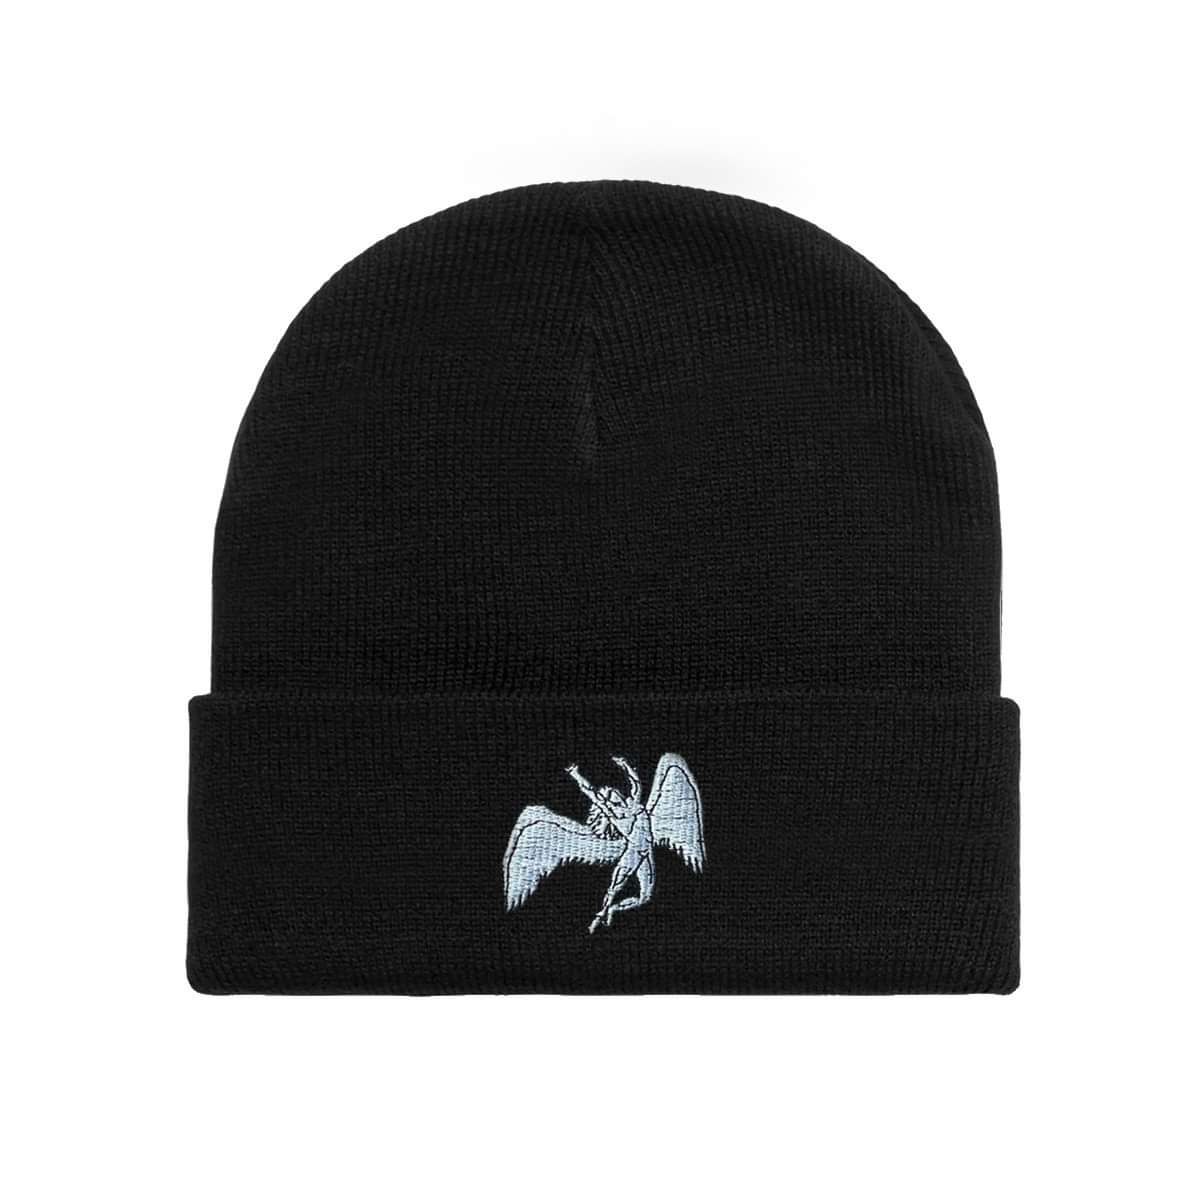 Led Zeppelin Embroidered Icarus Black Cuffed Beanie - Led Zeppelin